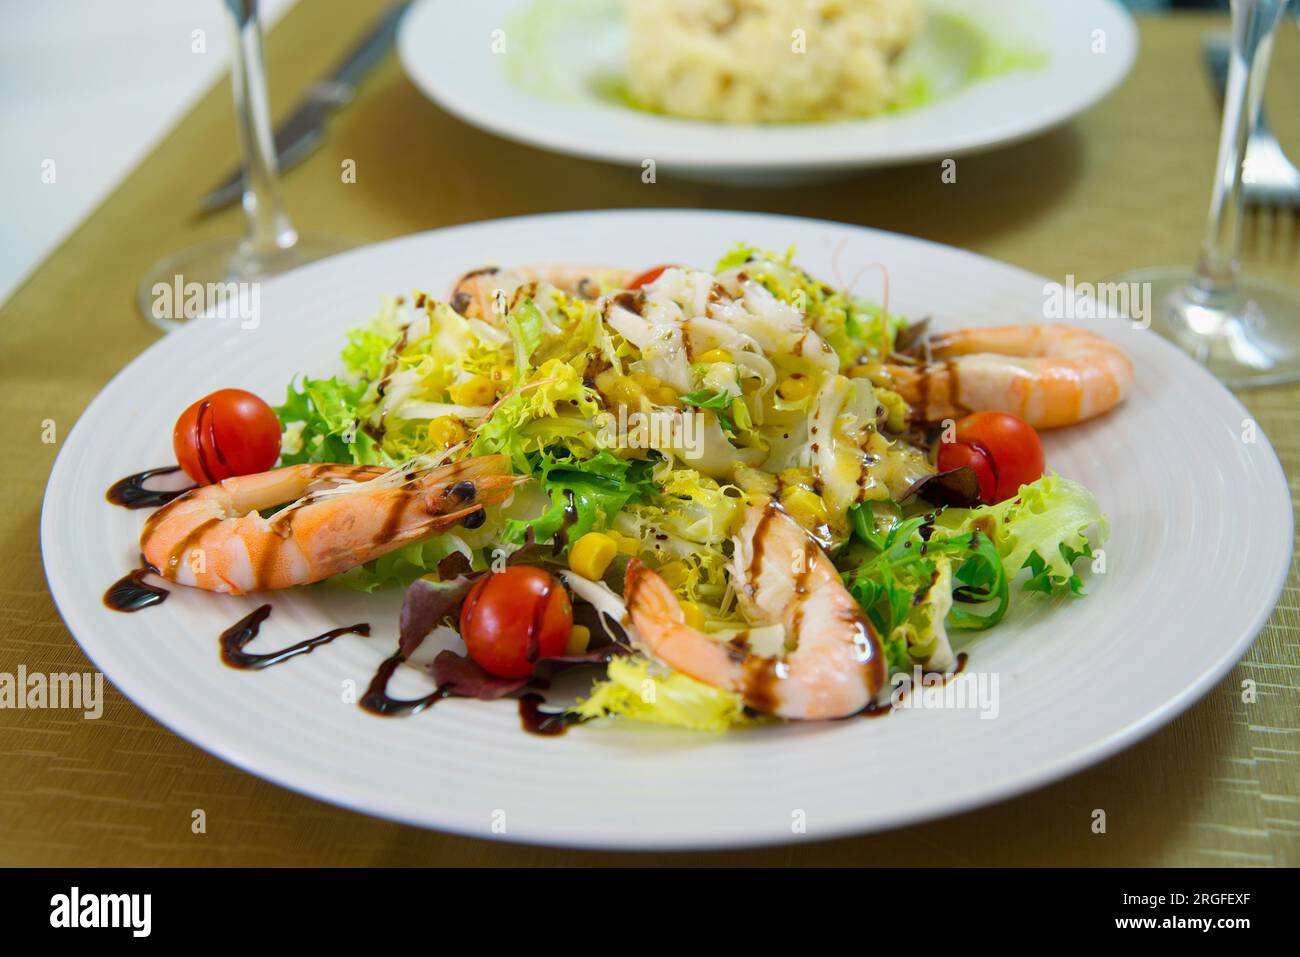 Salad made of shrimps, lettuce, cherry tomatoes and Modena vinegar. Stock Photo